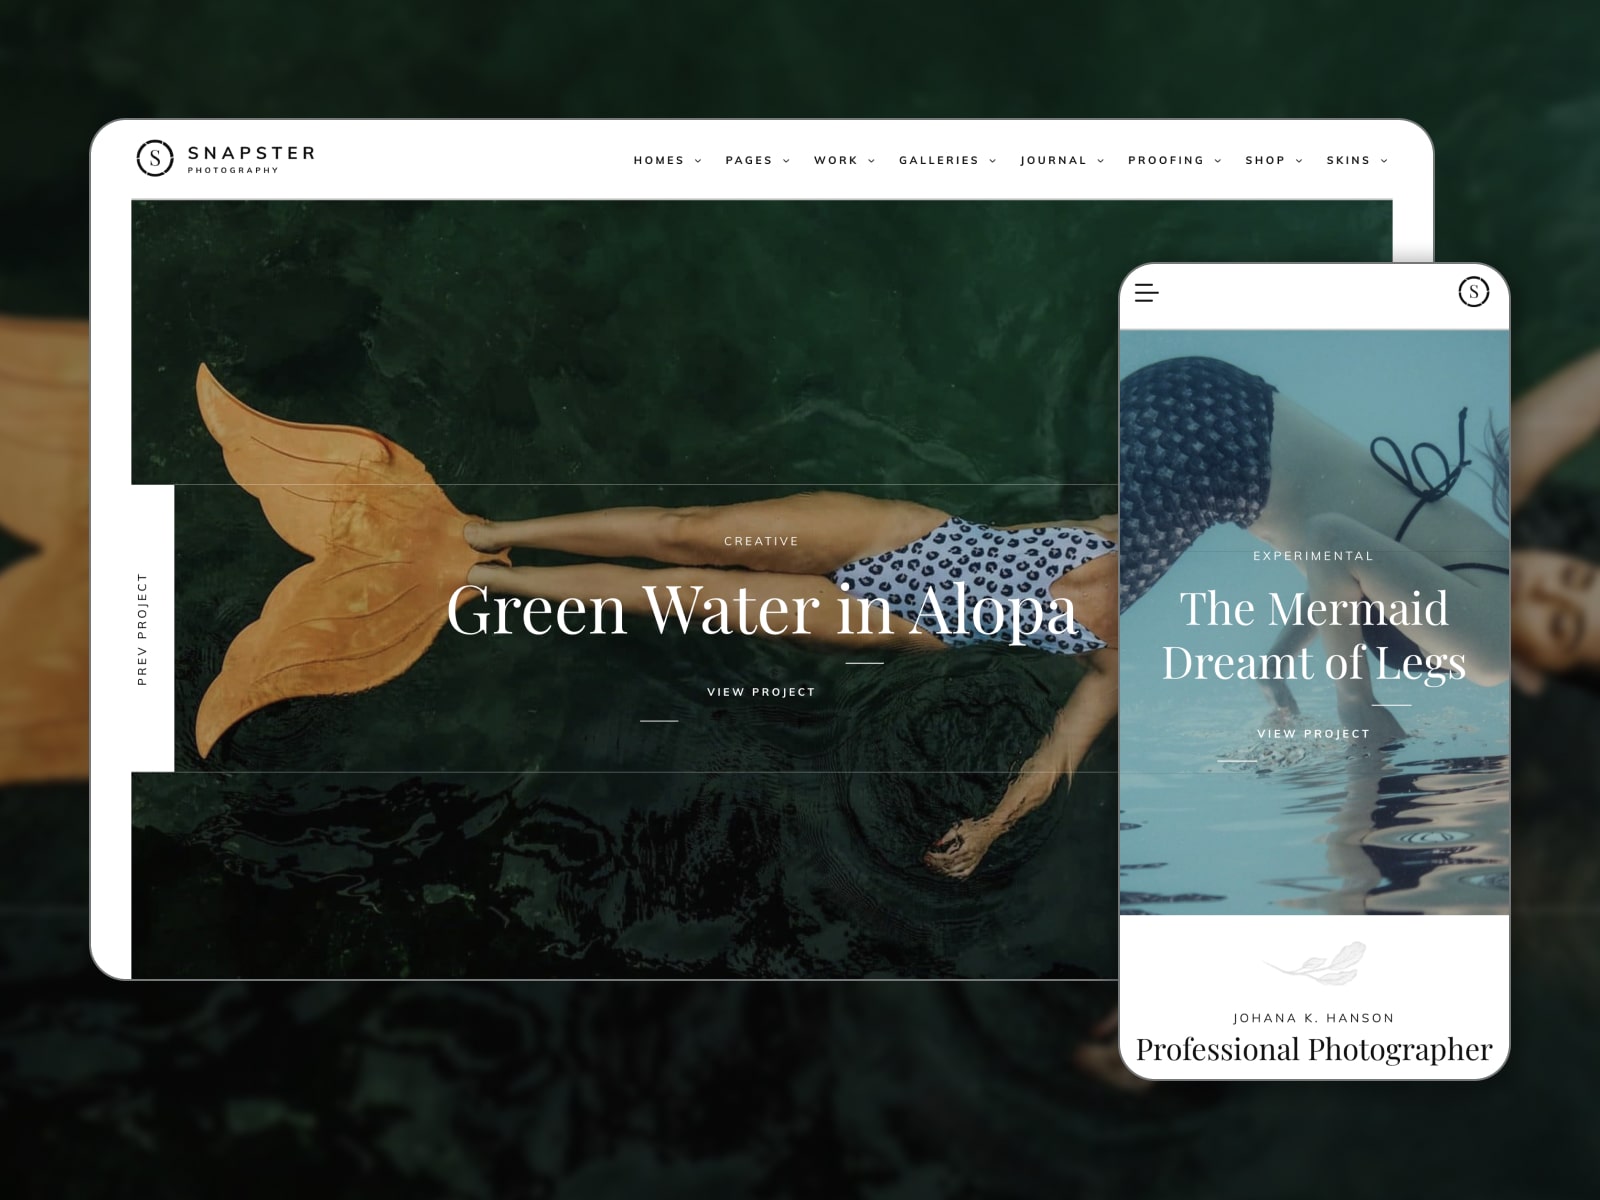 The Snapster WordPress theme design for photo projects.